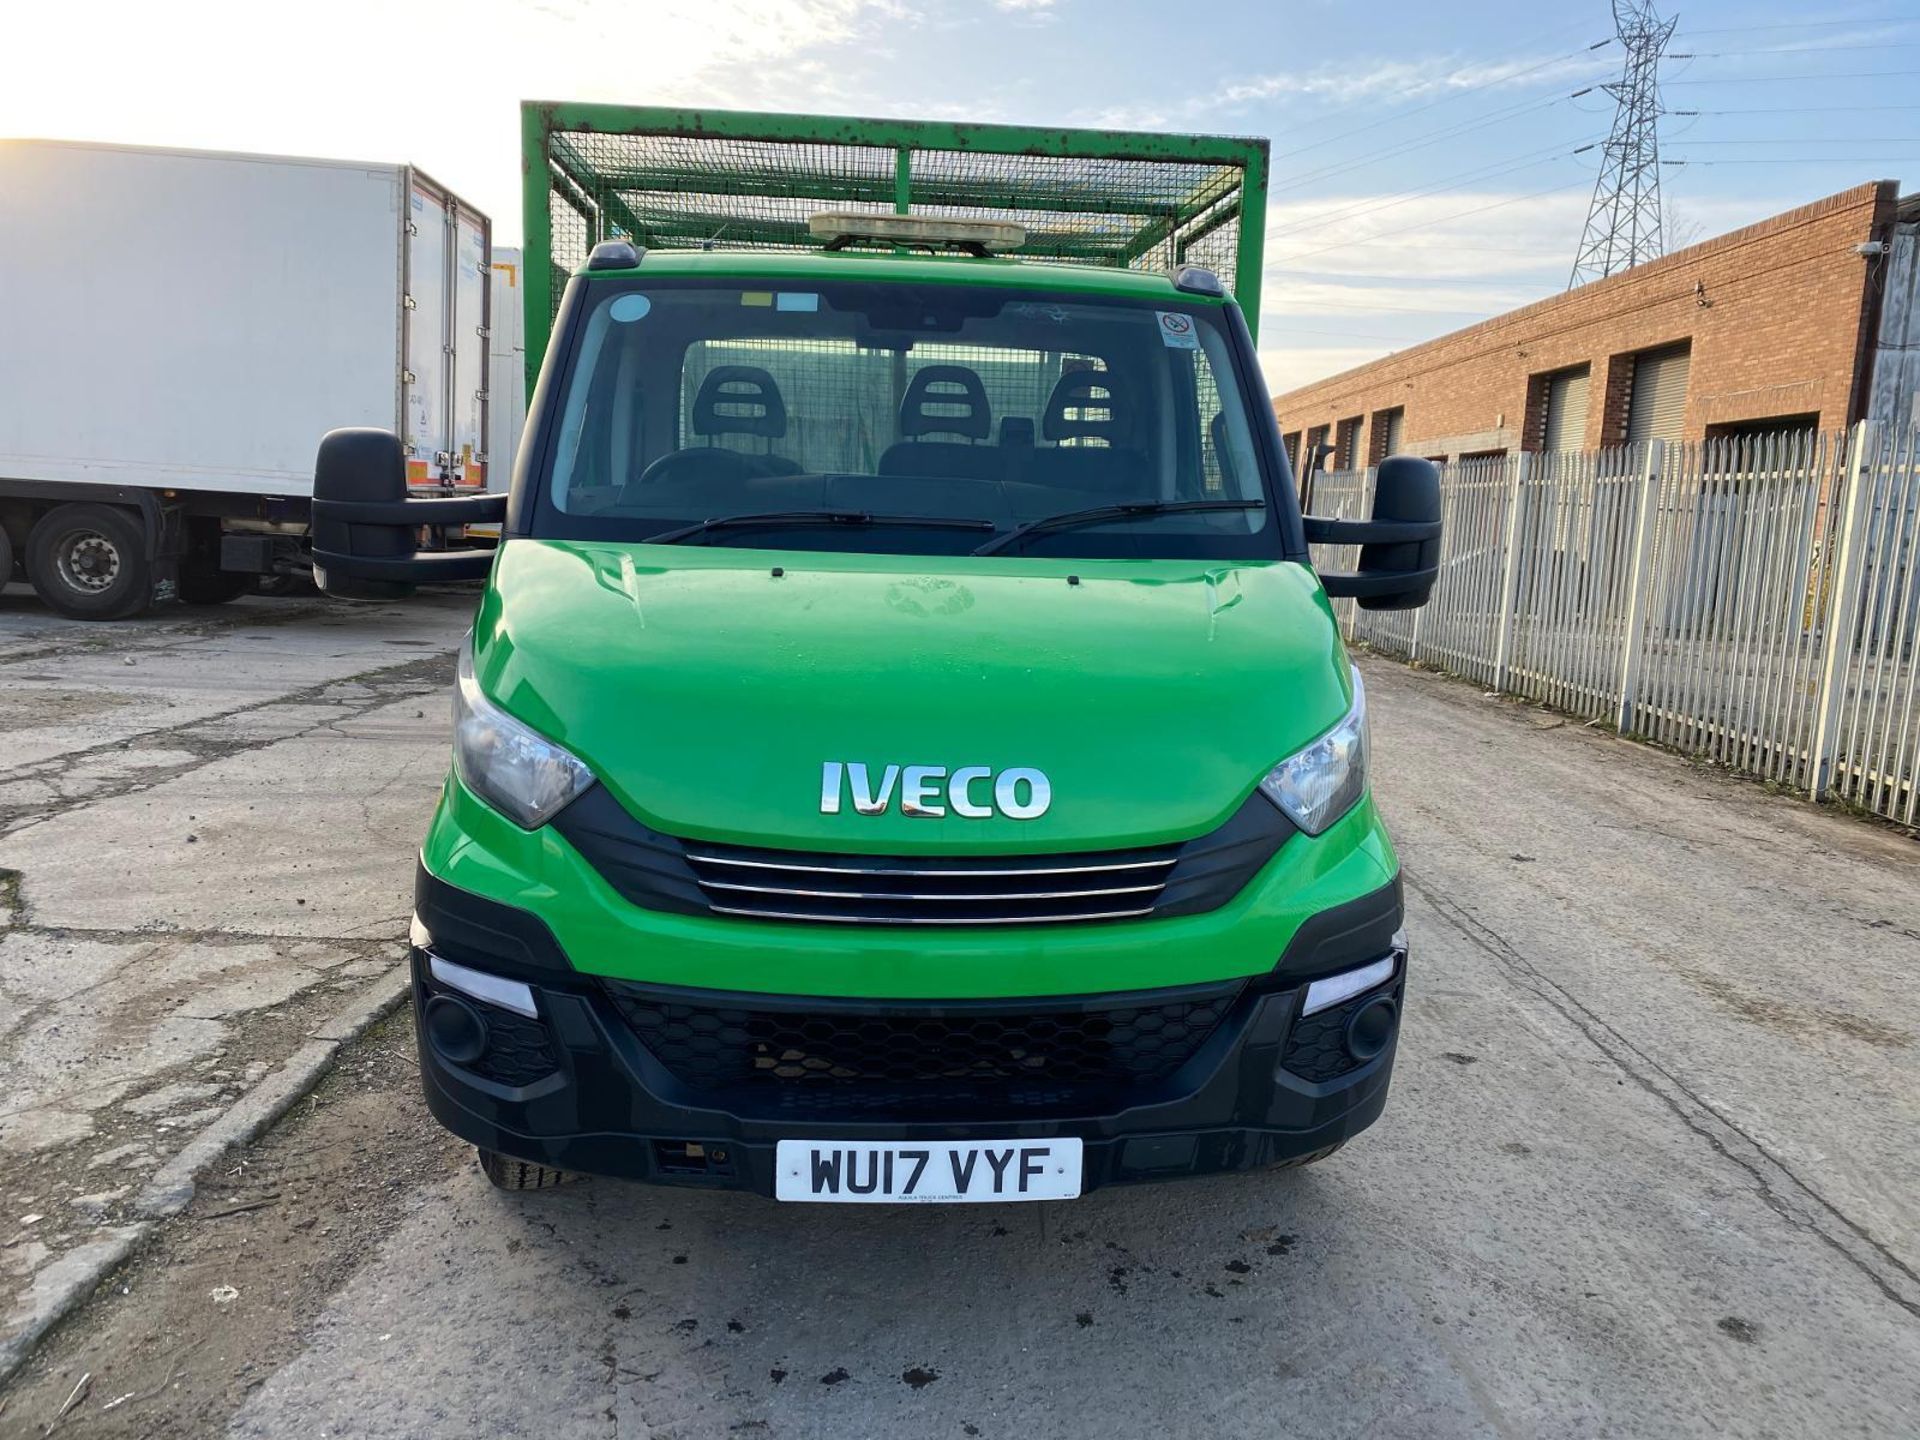 2017 IVECO DAILY 72C 180 7.2TON EURO6 CAGE FLATBED TRUCK WITH TAILLIFT - REQUIRES ATTENTION - Image 2 of 12